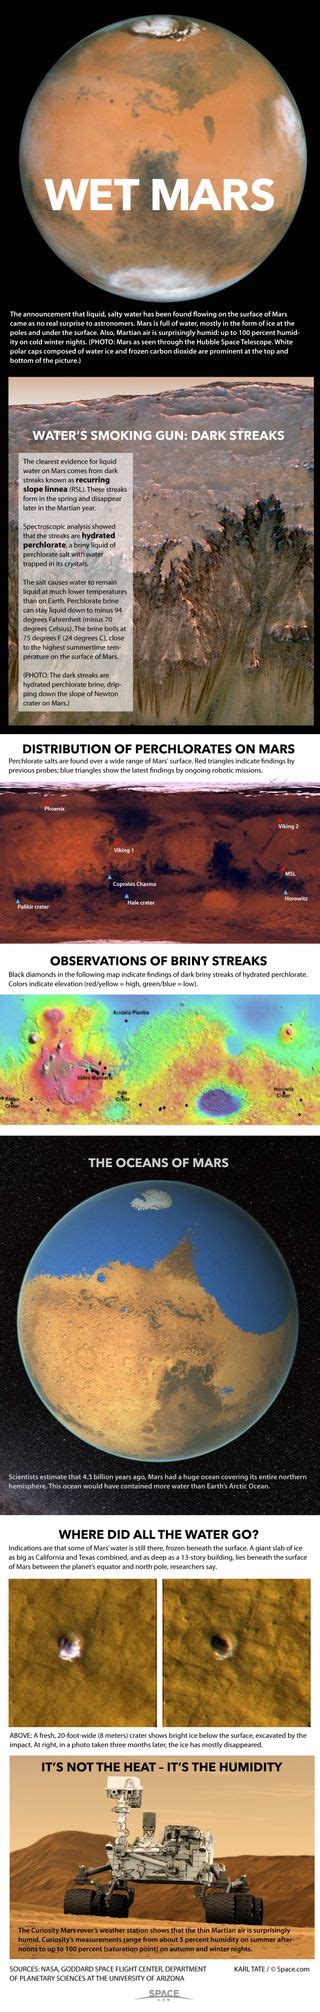 Water On Mars Wet Martian Discovery Explained Infographic Space